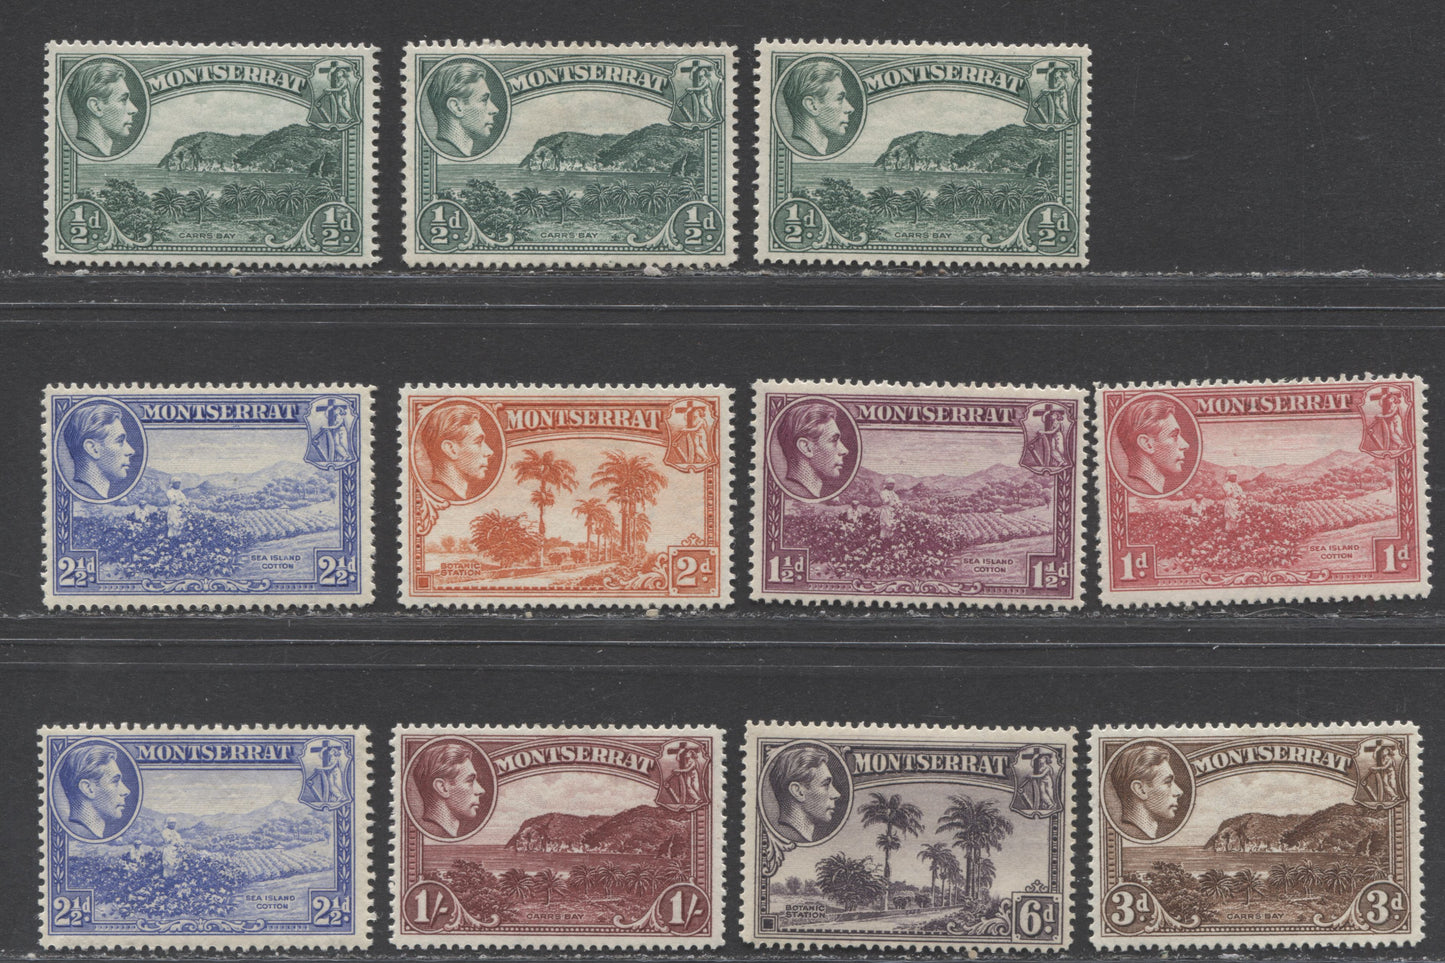 Lot 167 Montserrat SC#92-99 1938-1948 KGVI Pictorial Definitives, A F/VFNH & OG Range Of Singles, 2017 Scott Cat. $9.65 USD, Click on Listing to See ALL Pictures